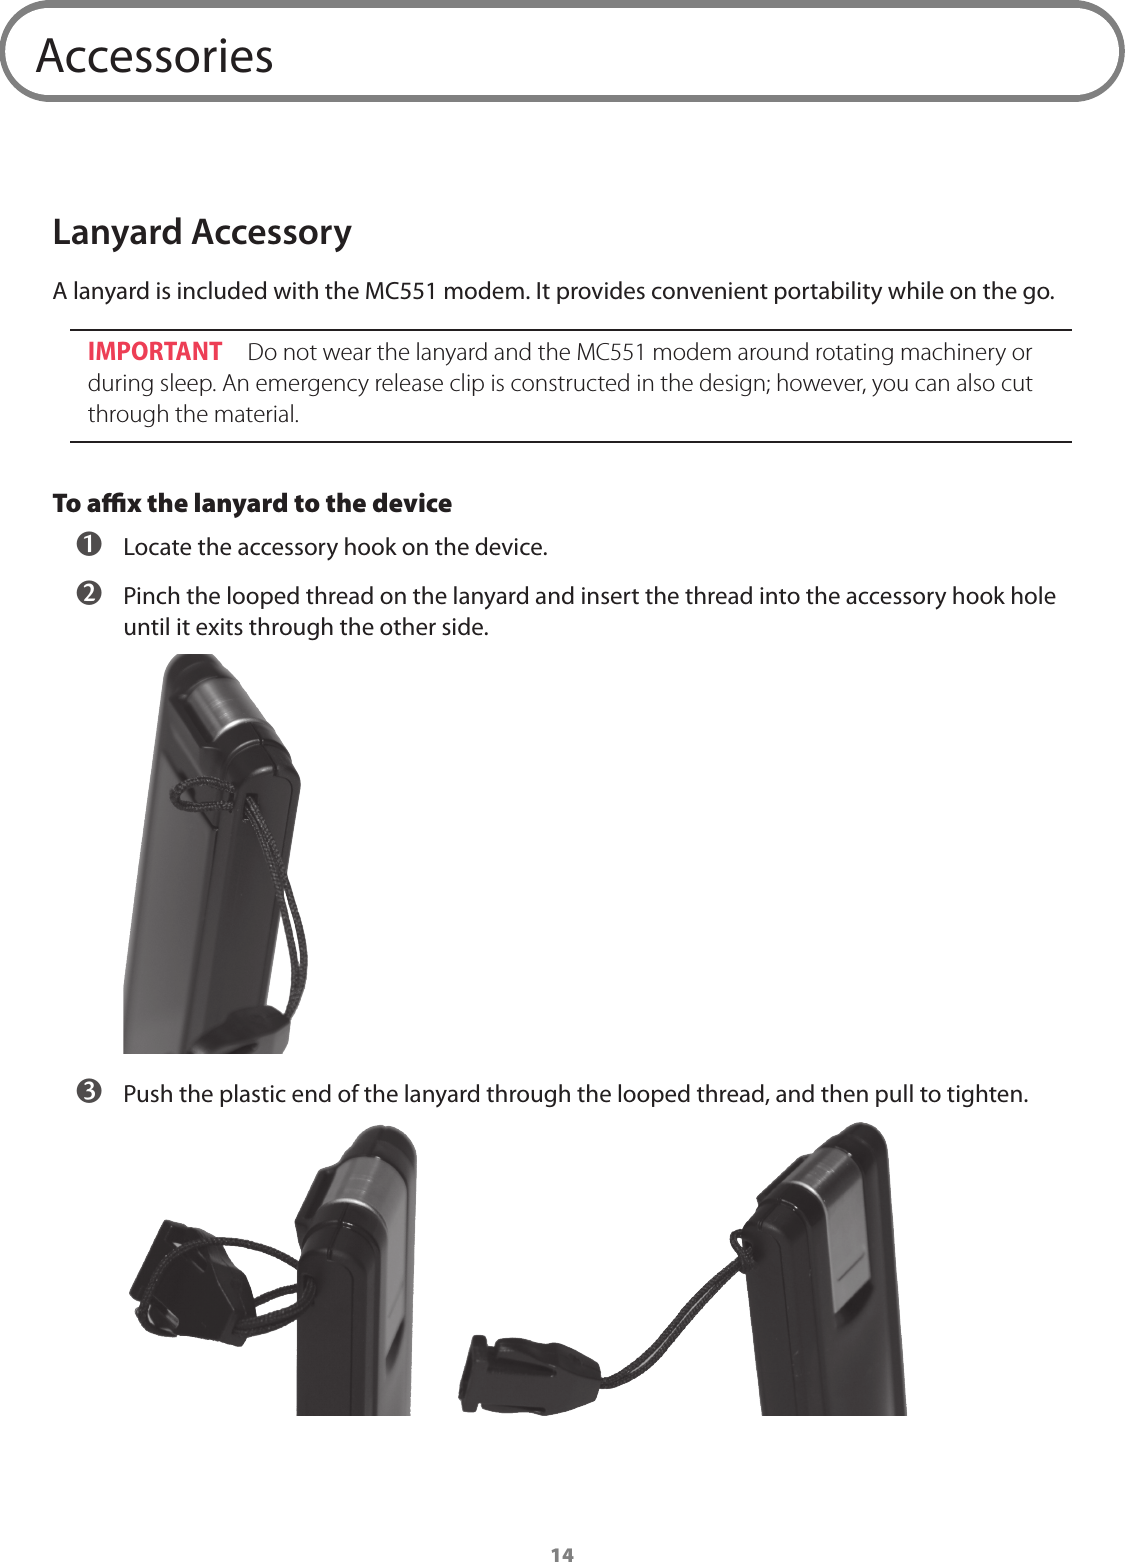 14AccessoriesLanyard AccessoryA lanyard is included with the MC551 modem. It provides convenient portability while on the go.IMPORTANT Do not wear the lanyard and the MC551 modem around rotating machinery or during sleep. An emergency release clip is constructed in the design; however, you can also cut through the material.To aﬃx the lanyard to the device  Locate the accessory hook on the device.  Pinch the looped thread on the lanyard and insert the thread into the accessory hook hole until it exits through the other side.  Push the plastic end of the lanyard through the looped thread, and then pull to tighten. 